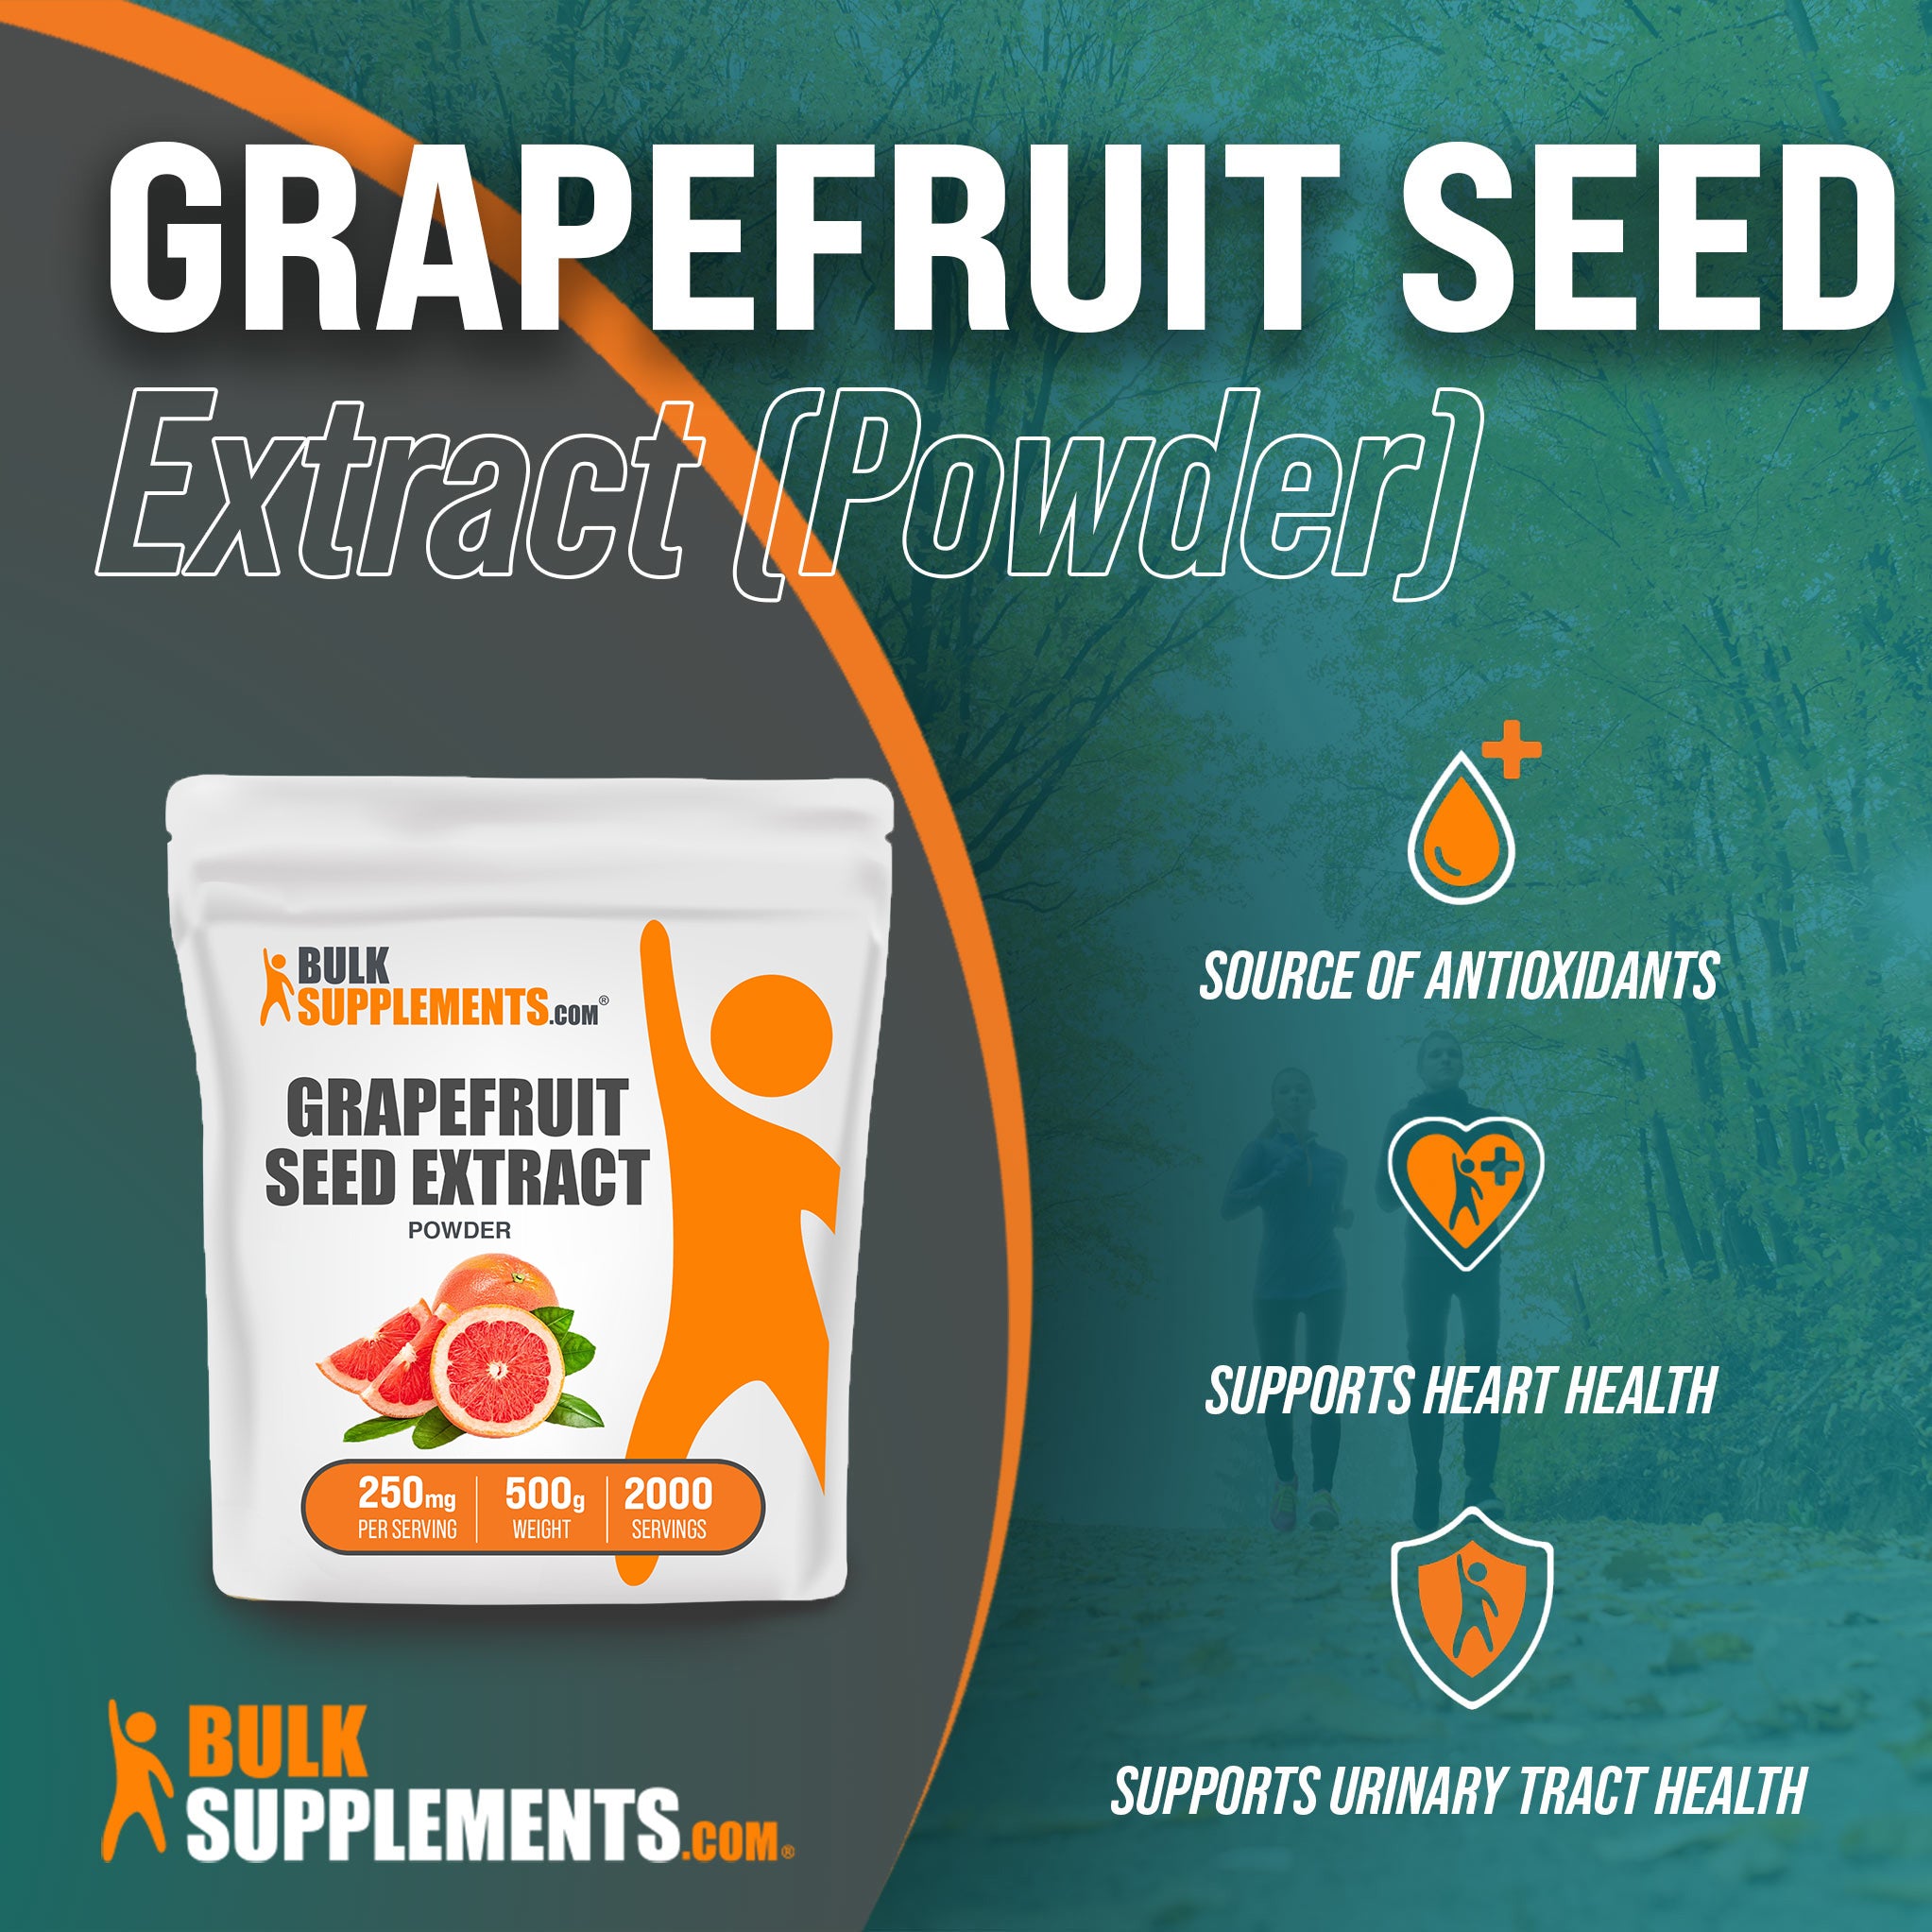 Benefits of Grapefruit Seed Extract; source of antioxidants, supports heart health, supports urinary tract health